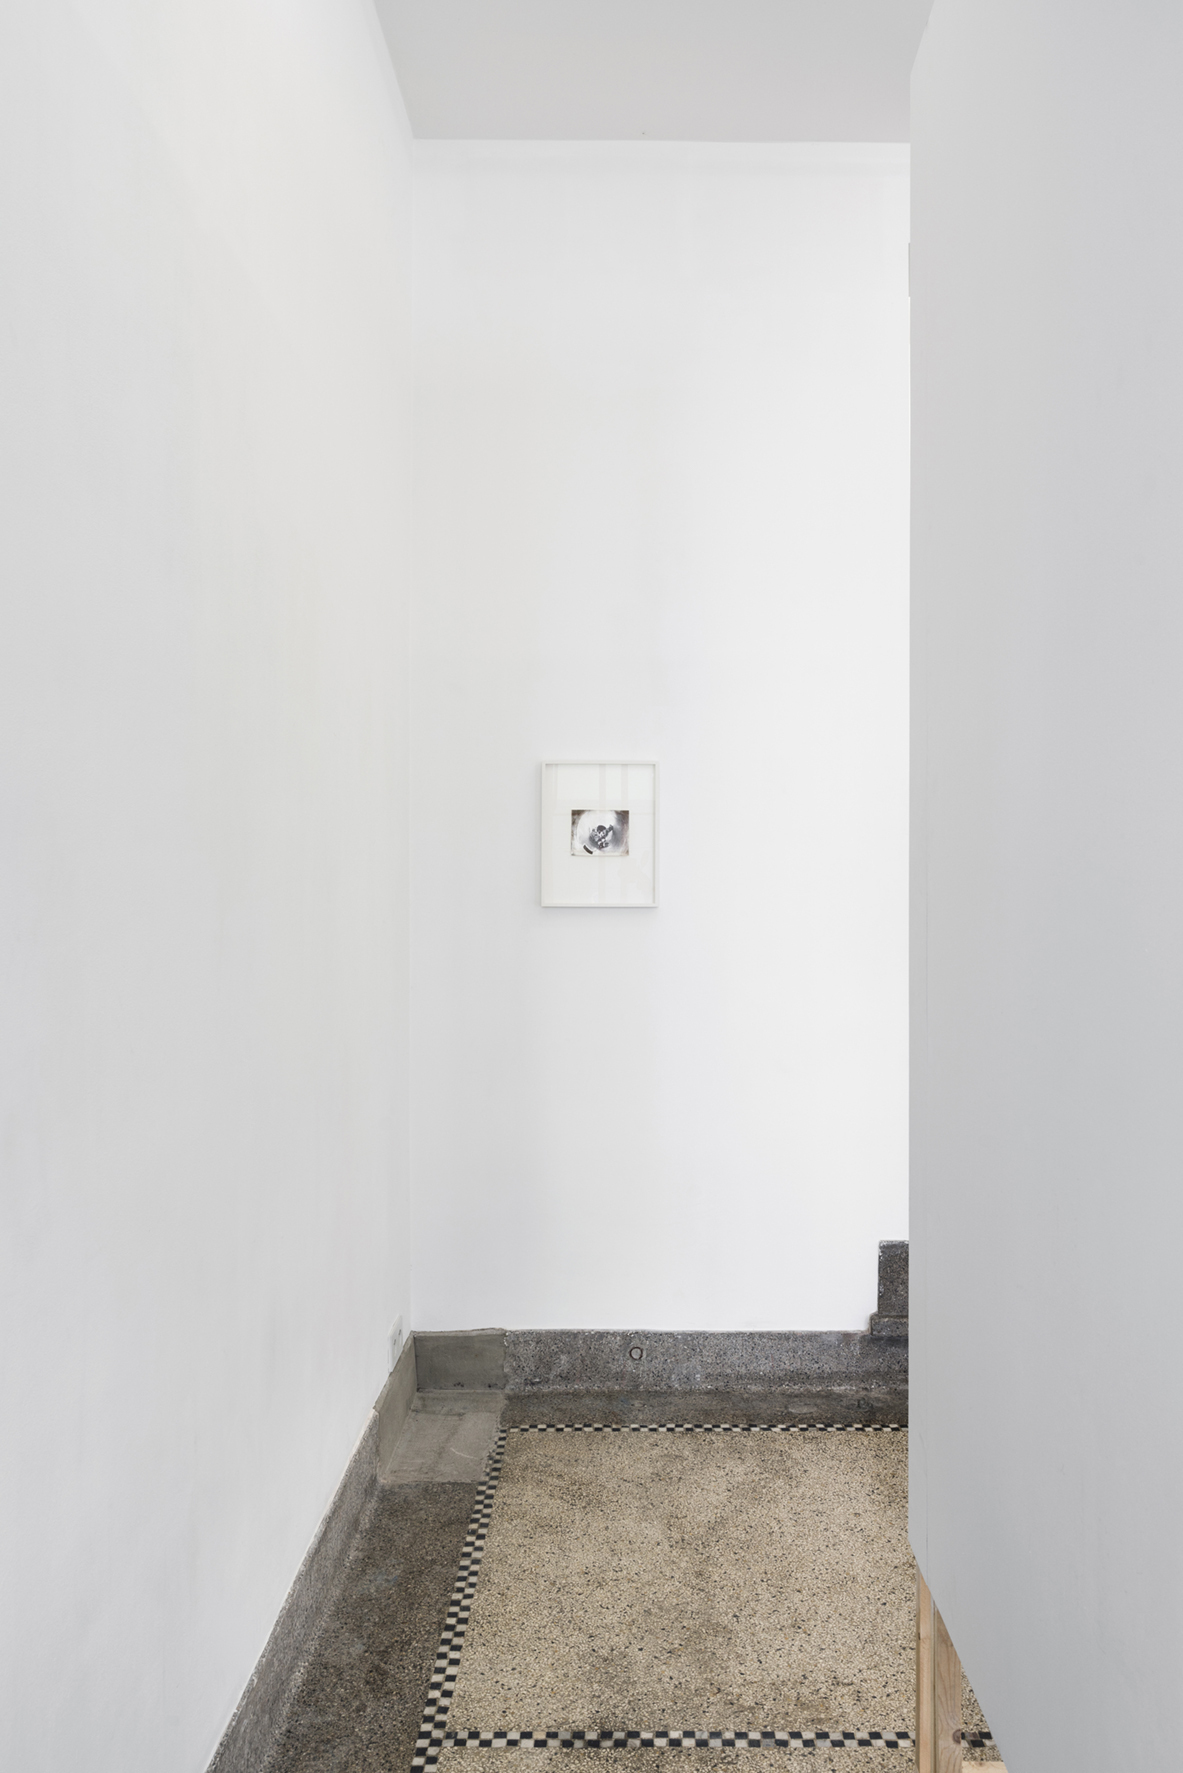 Installation view, Kevin Gallagher, Figuration, 2020